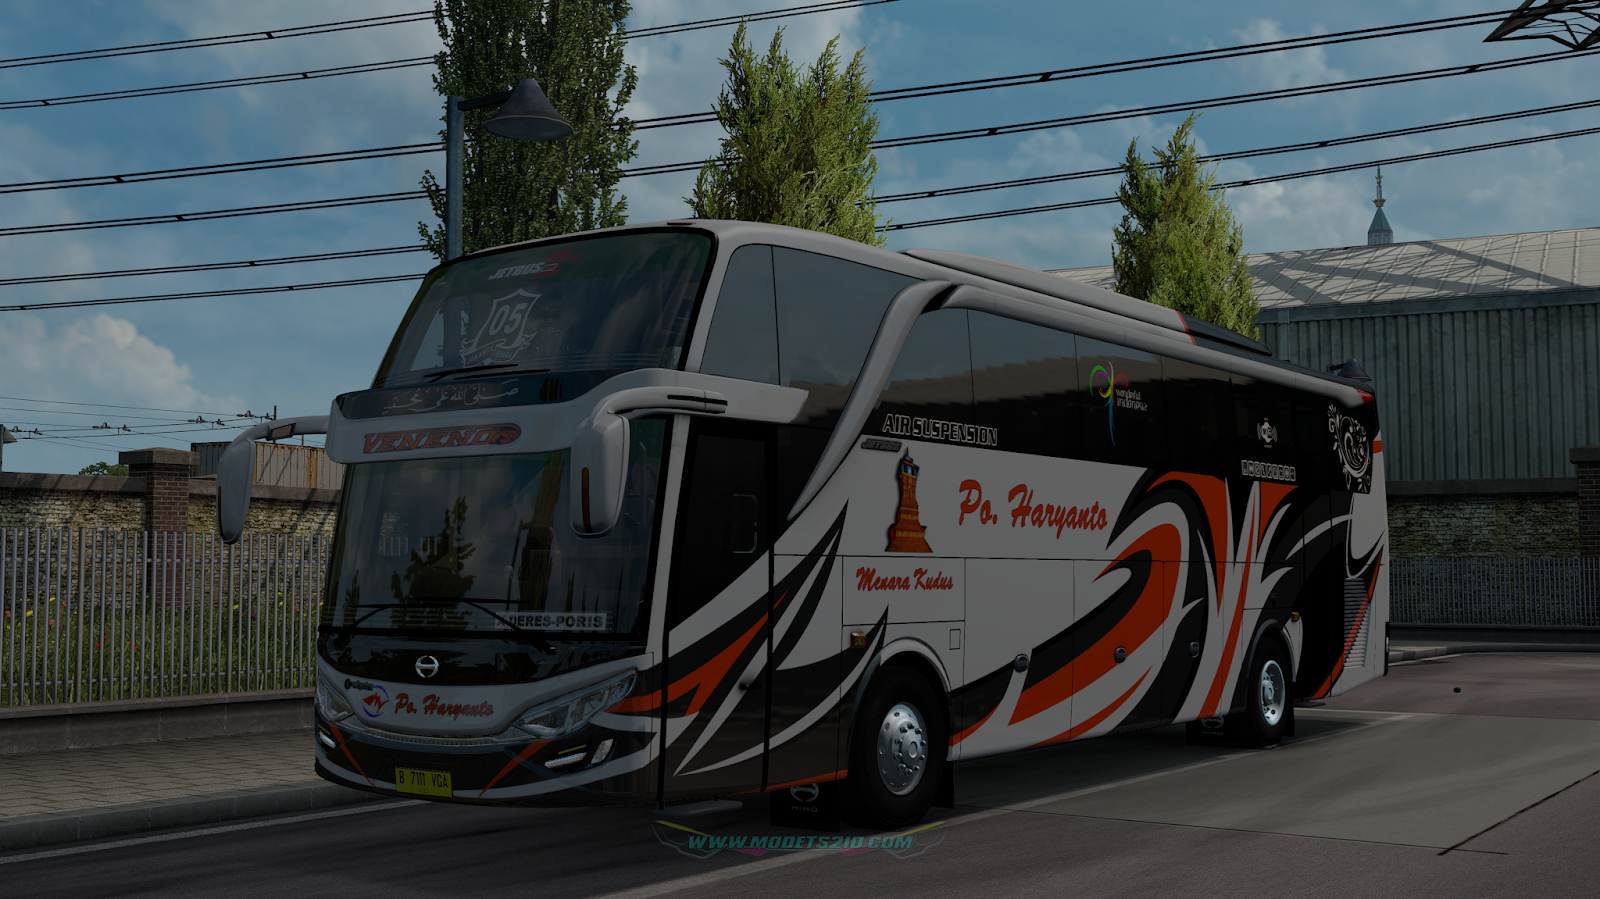 Wallpaper Bus Indonesia Part 2 Mod Ets2 Indonesia